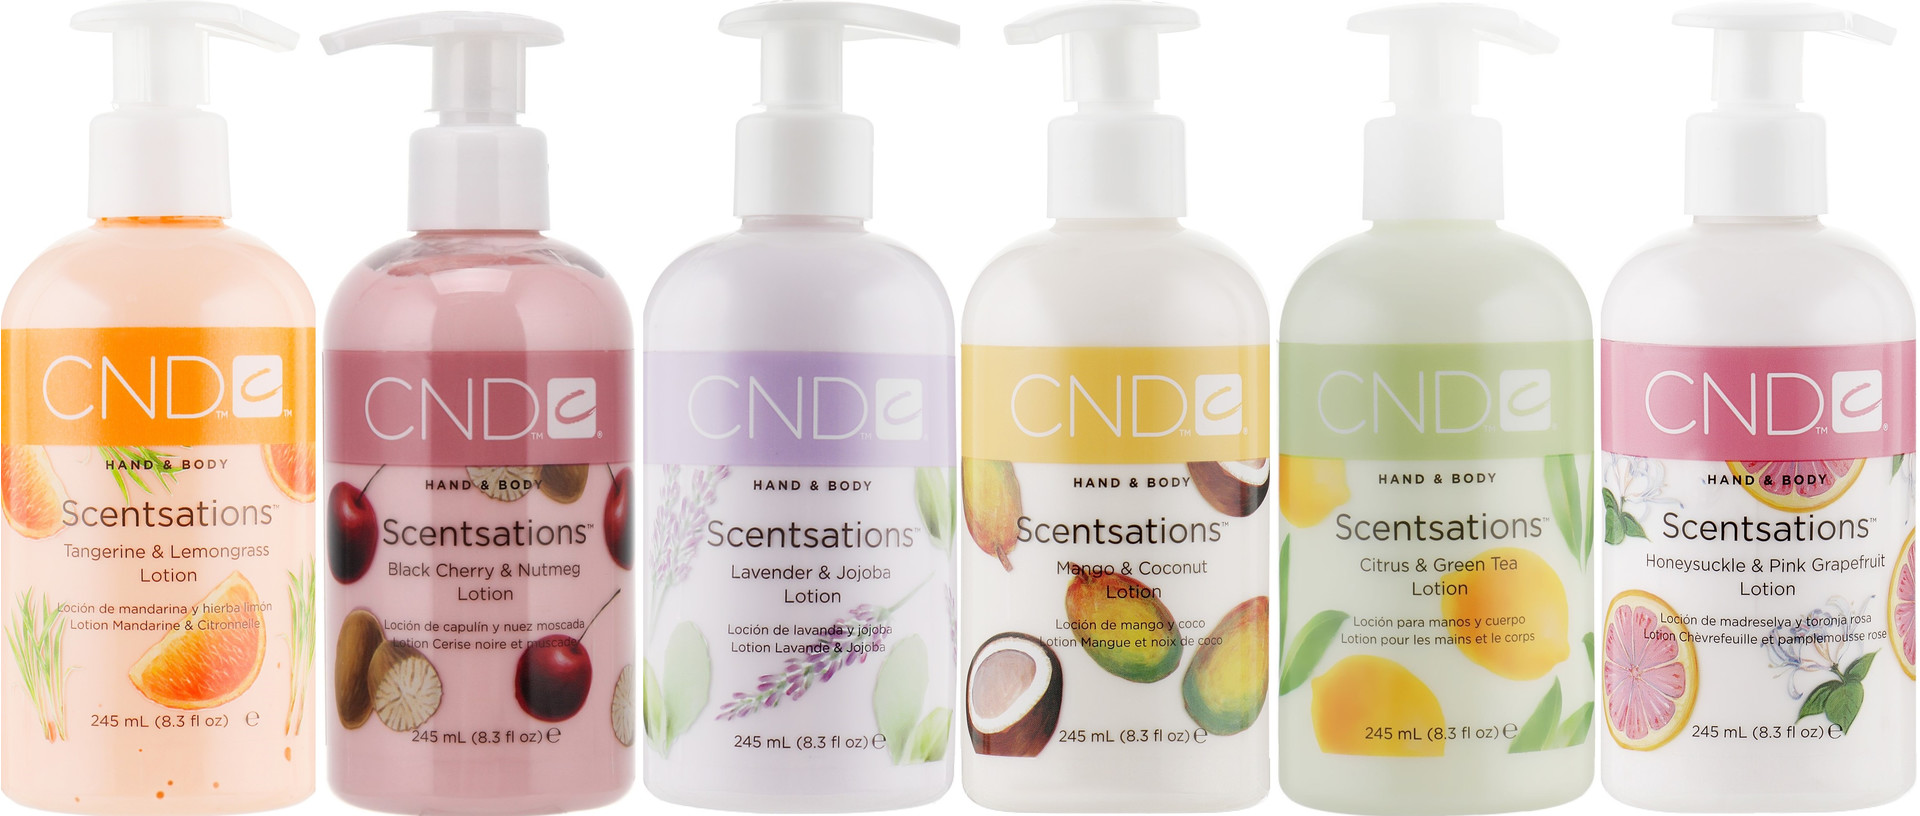 Creative Nail Design Scentsations Hand & Body Lotion, Cucumber & Aloe - wide 1